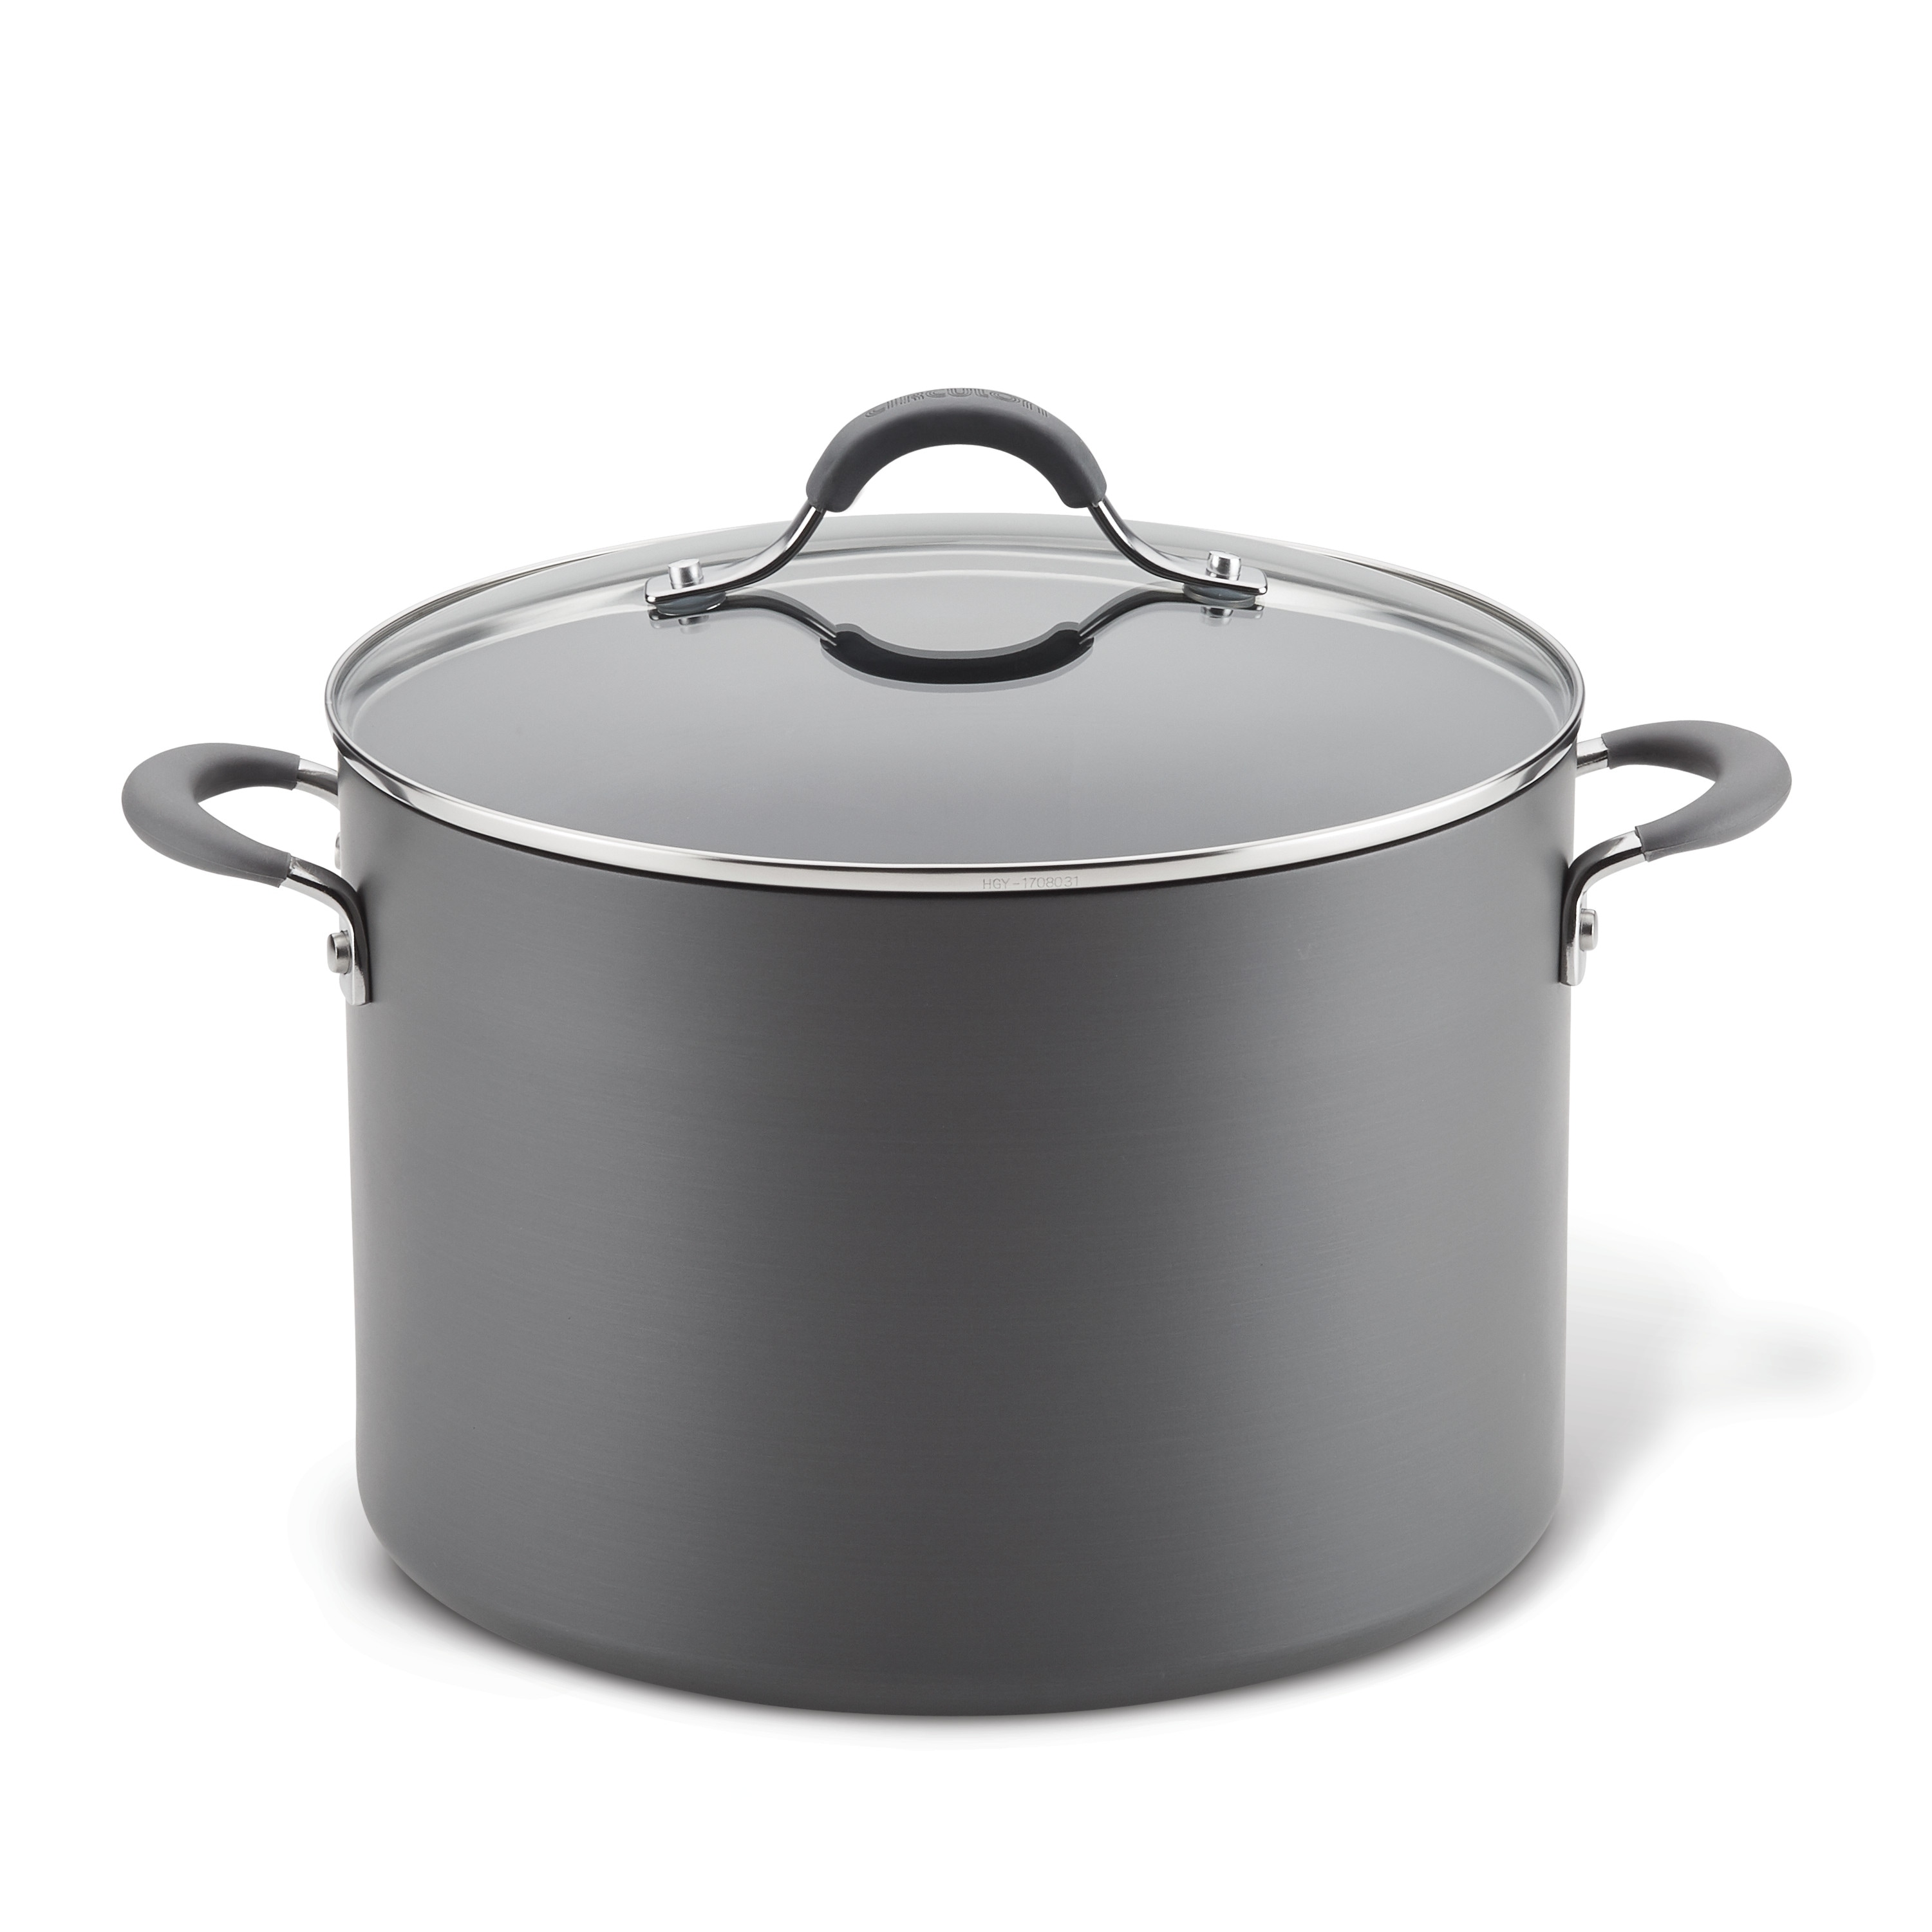 https://ak1.ostkcdn.com/images/products/is/images/direct/aaa554b9a19eef5536b53f37d539f09dfde78132/Circulon-Radiance-Hard-Anodized-Nonstick-Wide-Stockpot%2C-10-Quart%2C-Gray.jpg